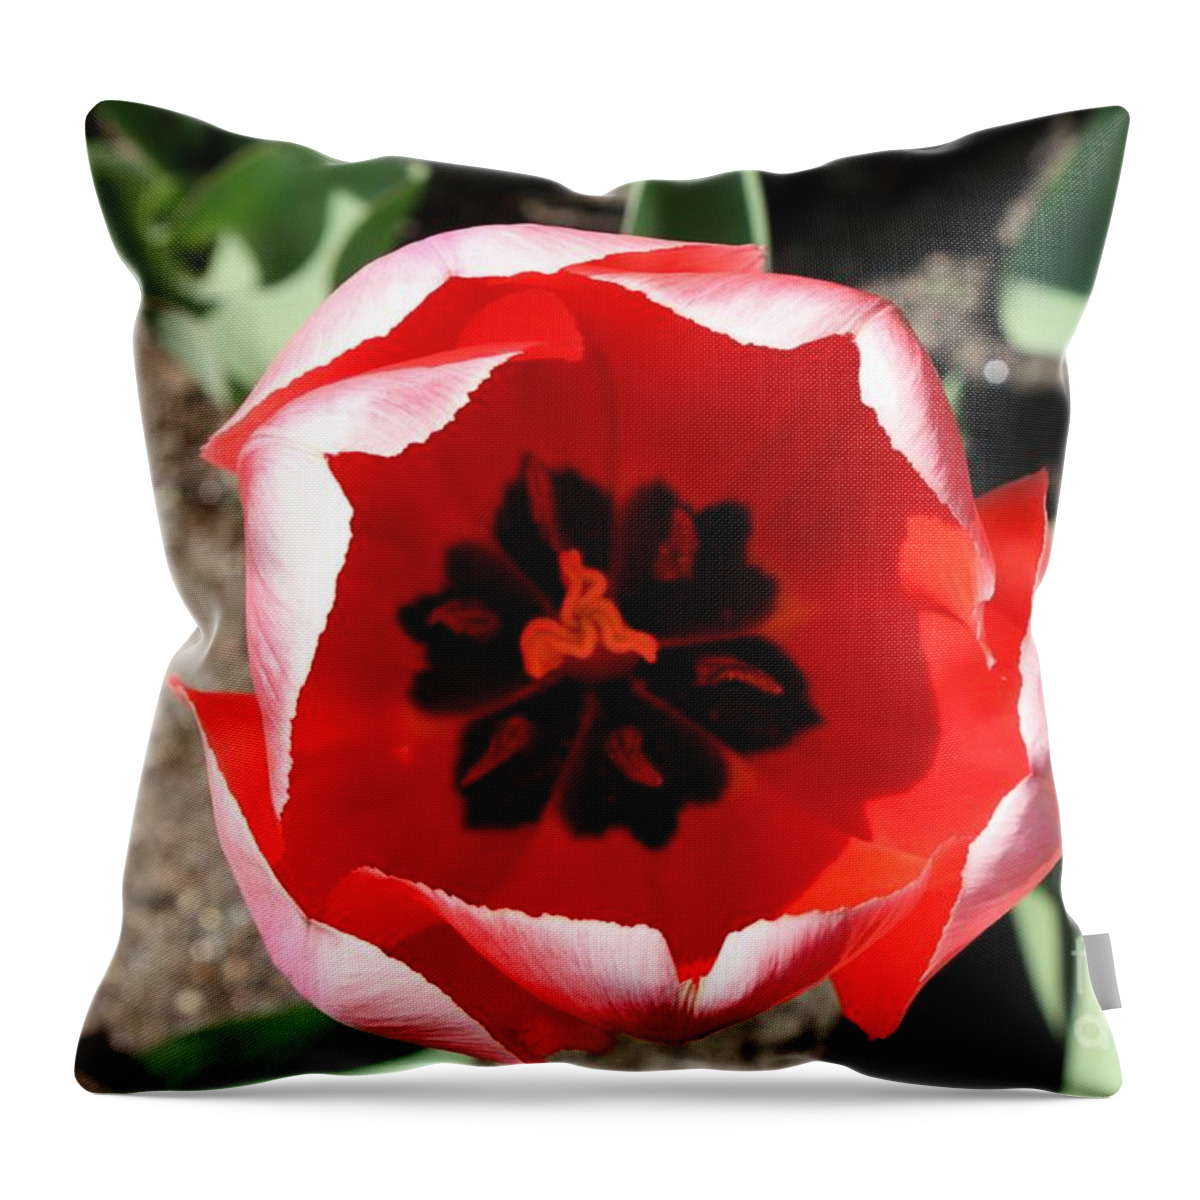 Macro Red Tulip Throw Pillow featuring the photograph Macro Red Tulip by John Telfer